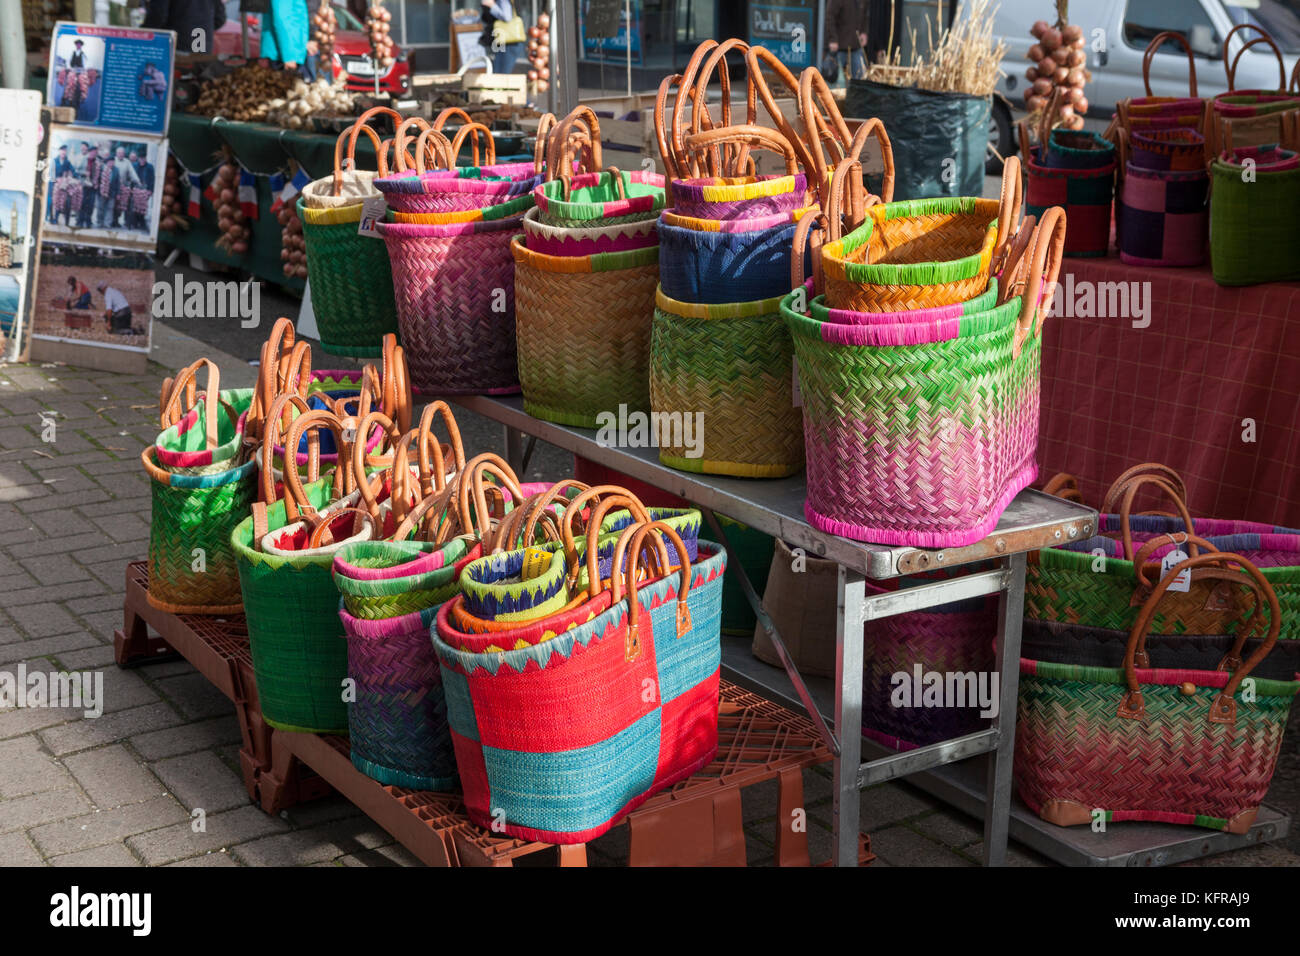 Coloured baskets on a market stall in a French Market in the UK Stock Photo